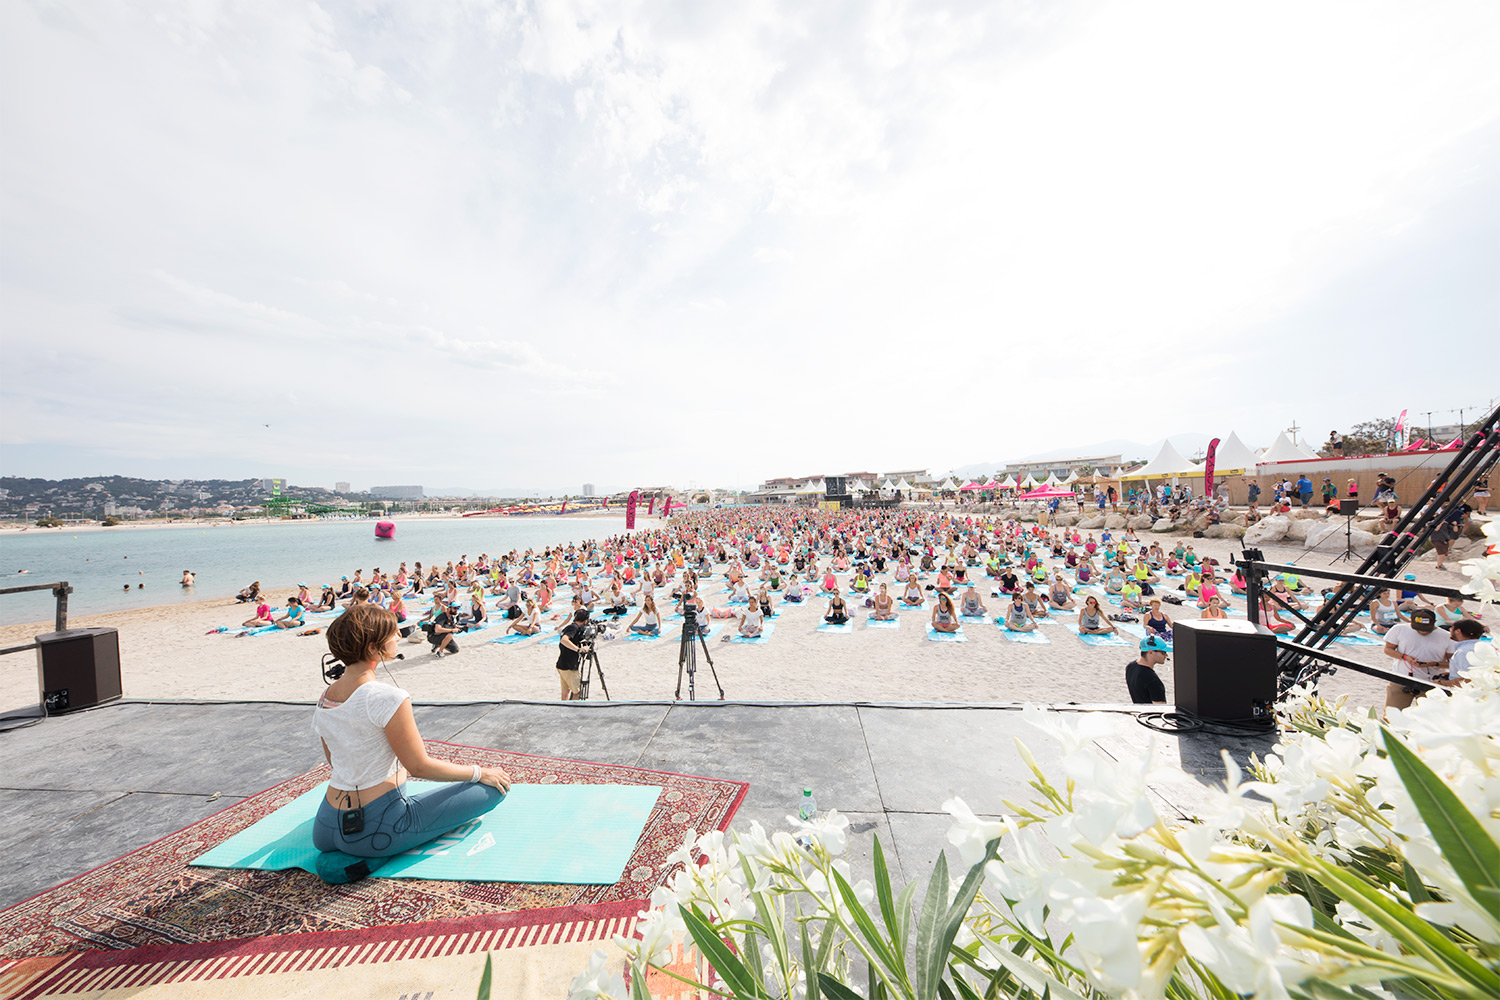 #ROXYfitness Marseille by the Numbers